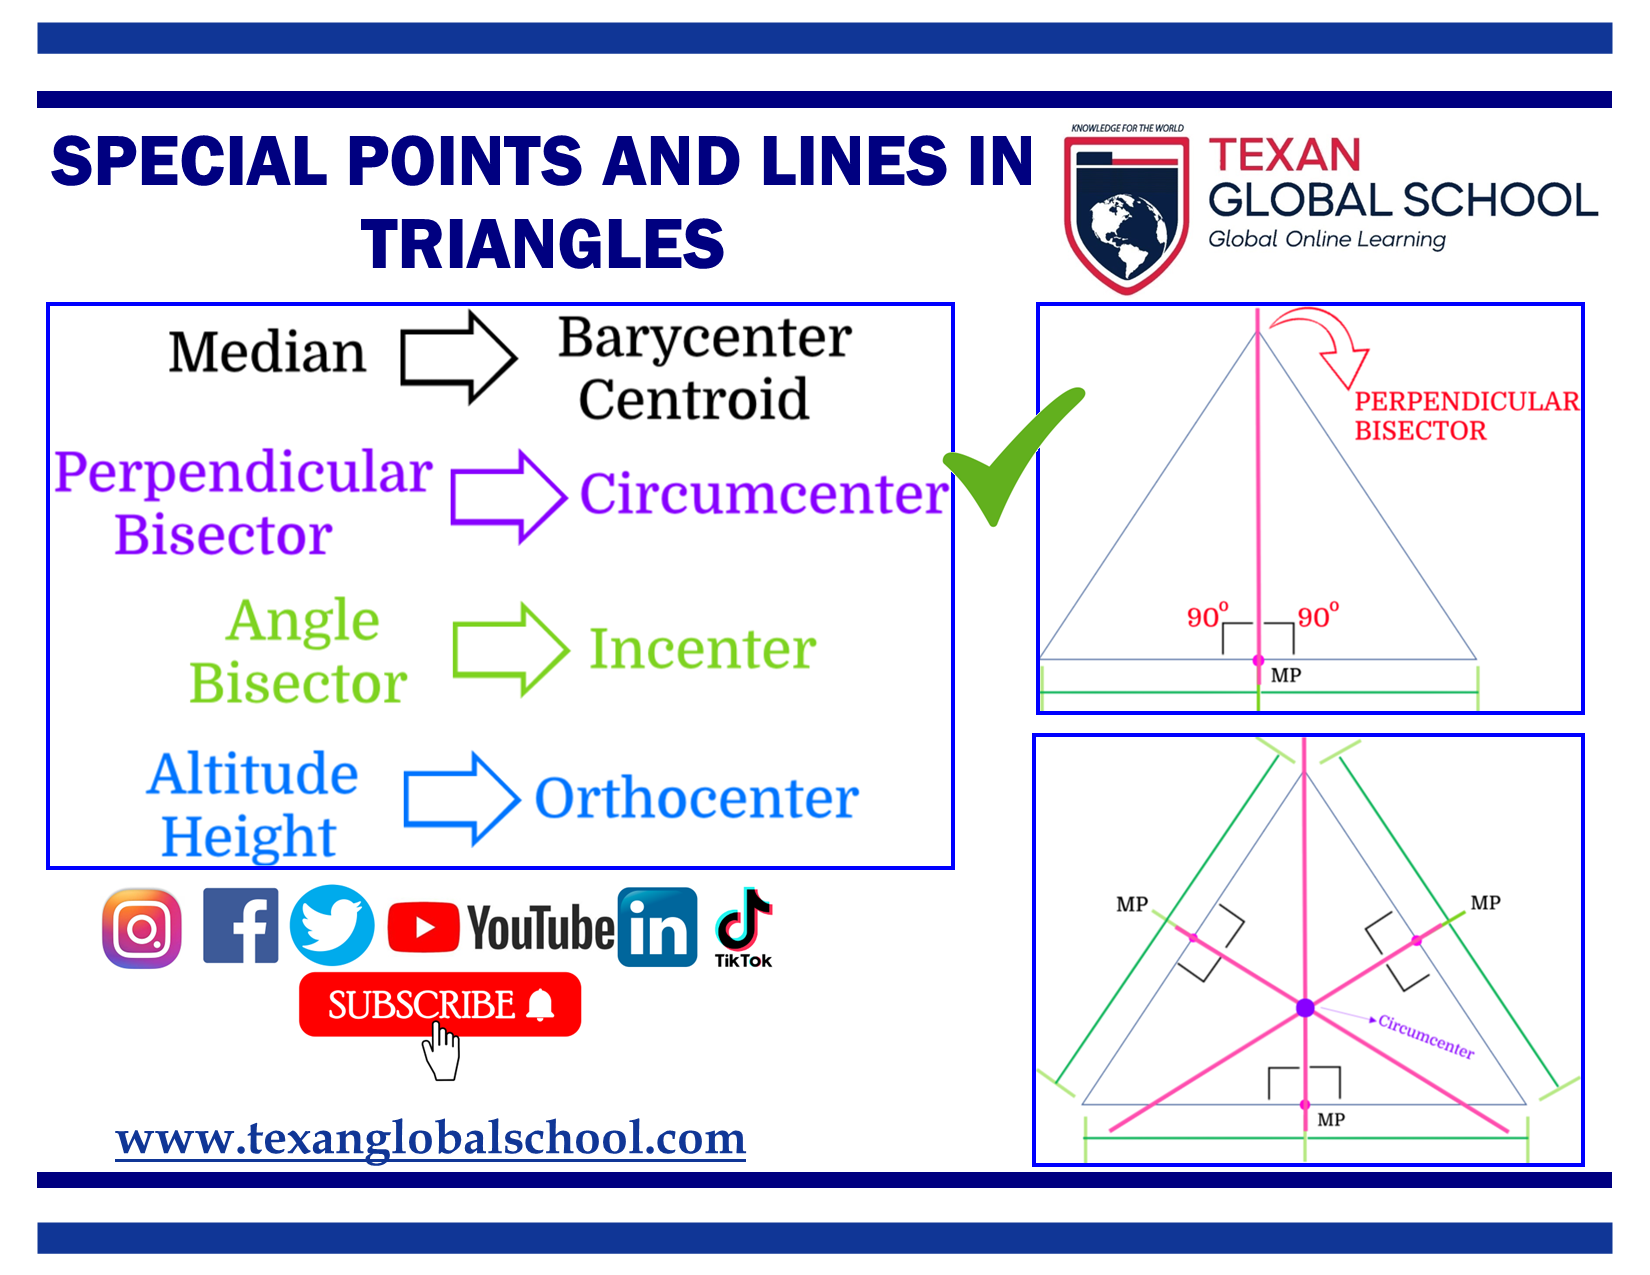 Special Points and Lines in Triangles 2